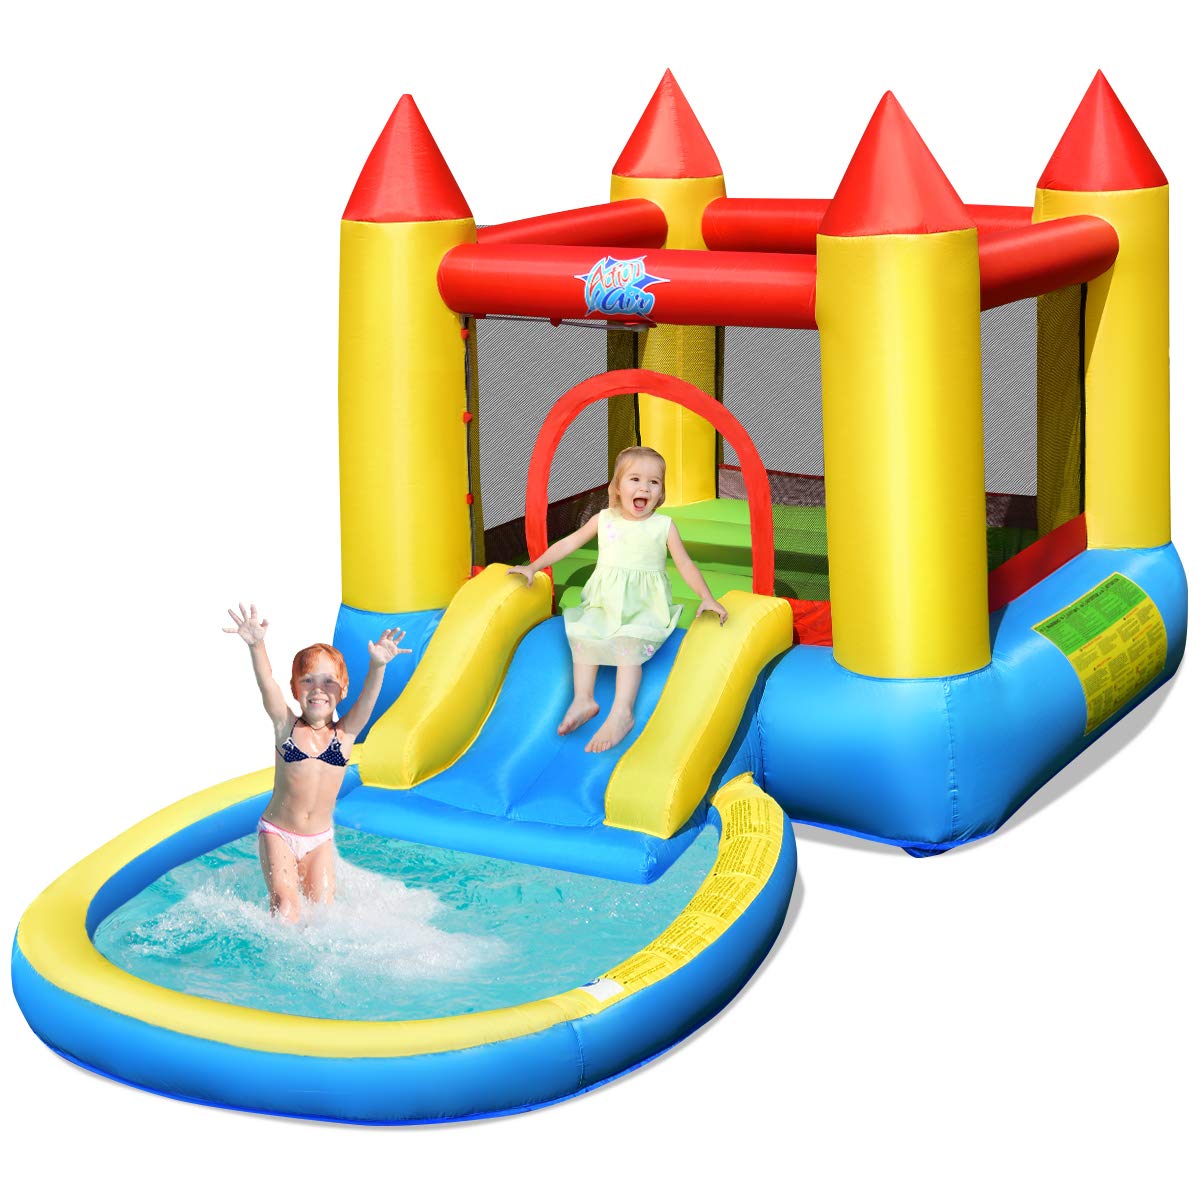 HONEY JOY Inflatable Water Slide, Toddler Water Bounce House Bouncy Park Castle w/Slide, Ocean Ball Pit, Indoor Outdoor Blow up Water Slides Inflatables for Kids and Adults Backyard(Without Blower) without blower